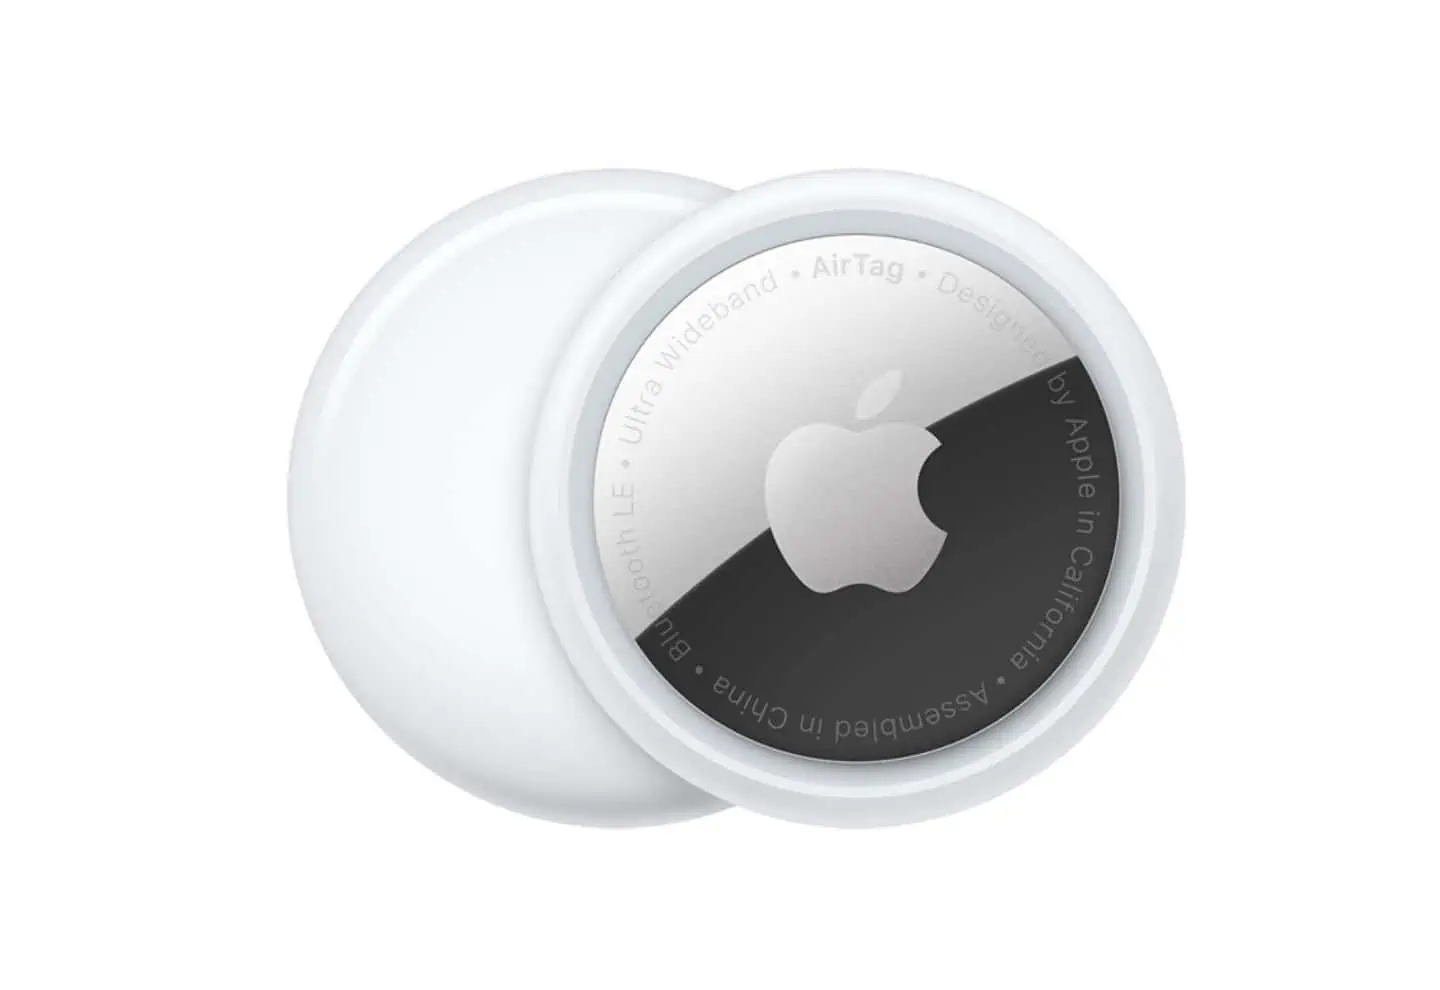 Apple AirTag now available to pre-order - MSPoweruser